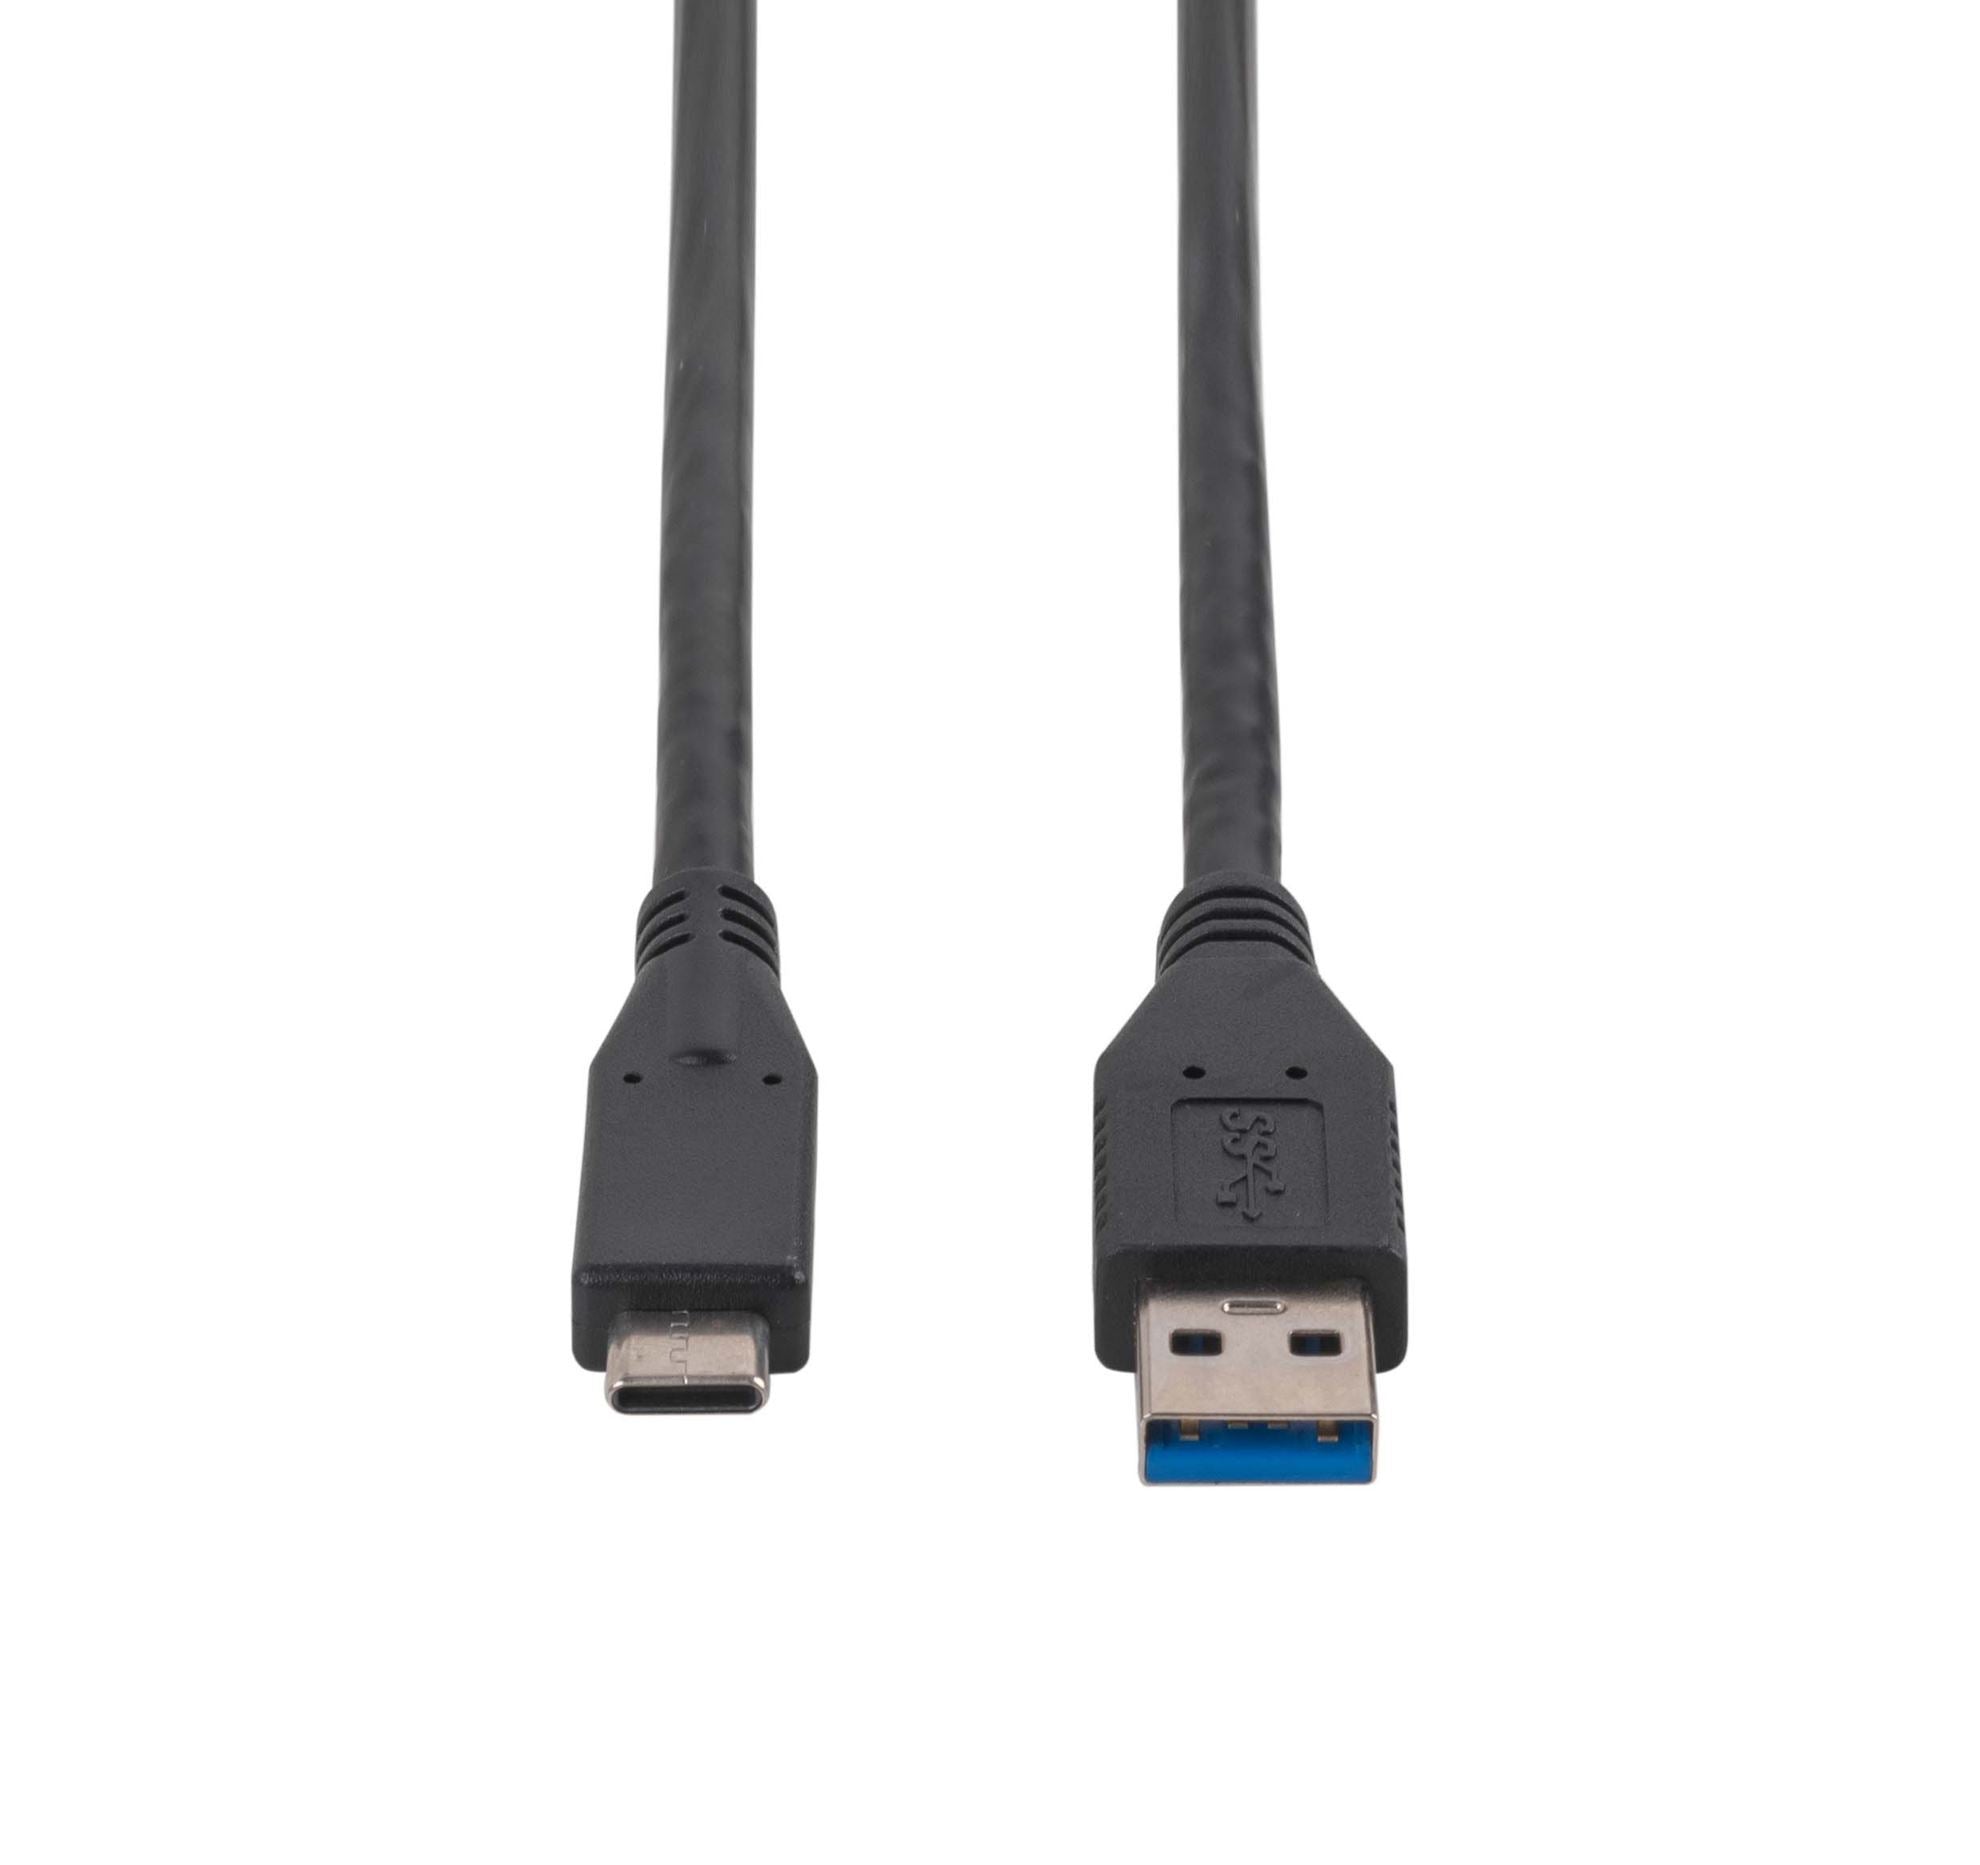 DYNAMIX_1M,_USB_3.1_USB-C_Male_to_USB-A_Male_Cable._Black_Colour._Up_to_10G_Data_Transfer_Speed,_Supports_3A_Current. 1135